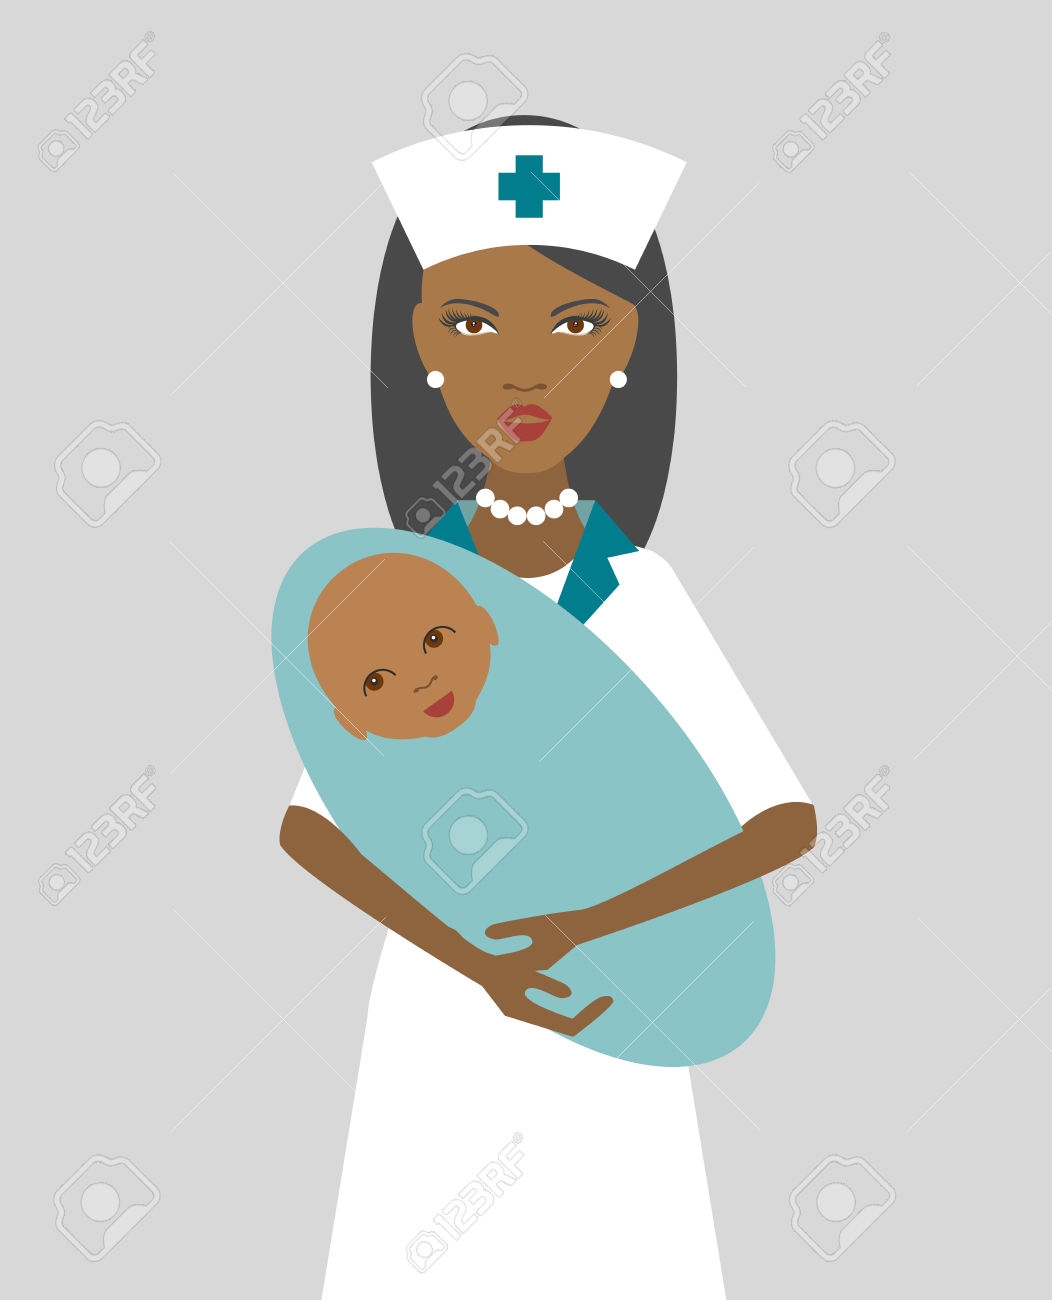 Clip Arts Related To : clip art black and white nurse. view all Nurse...